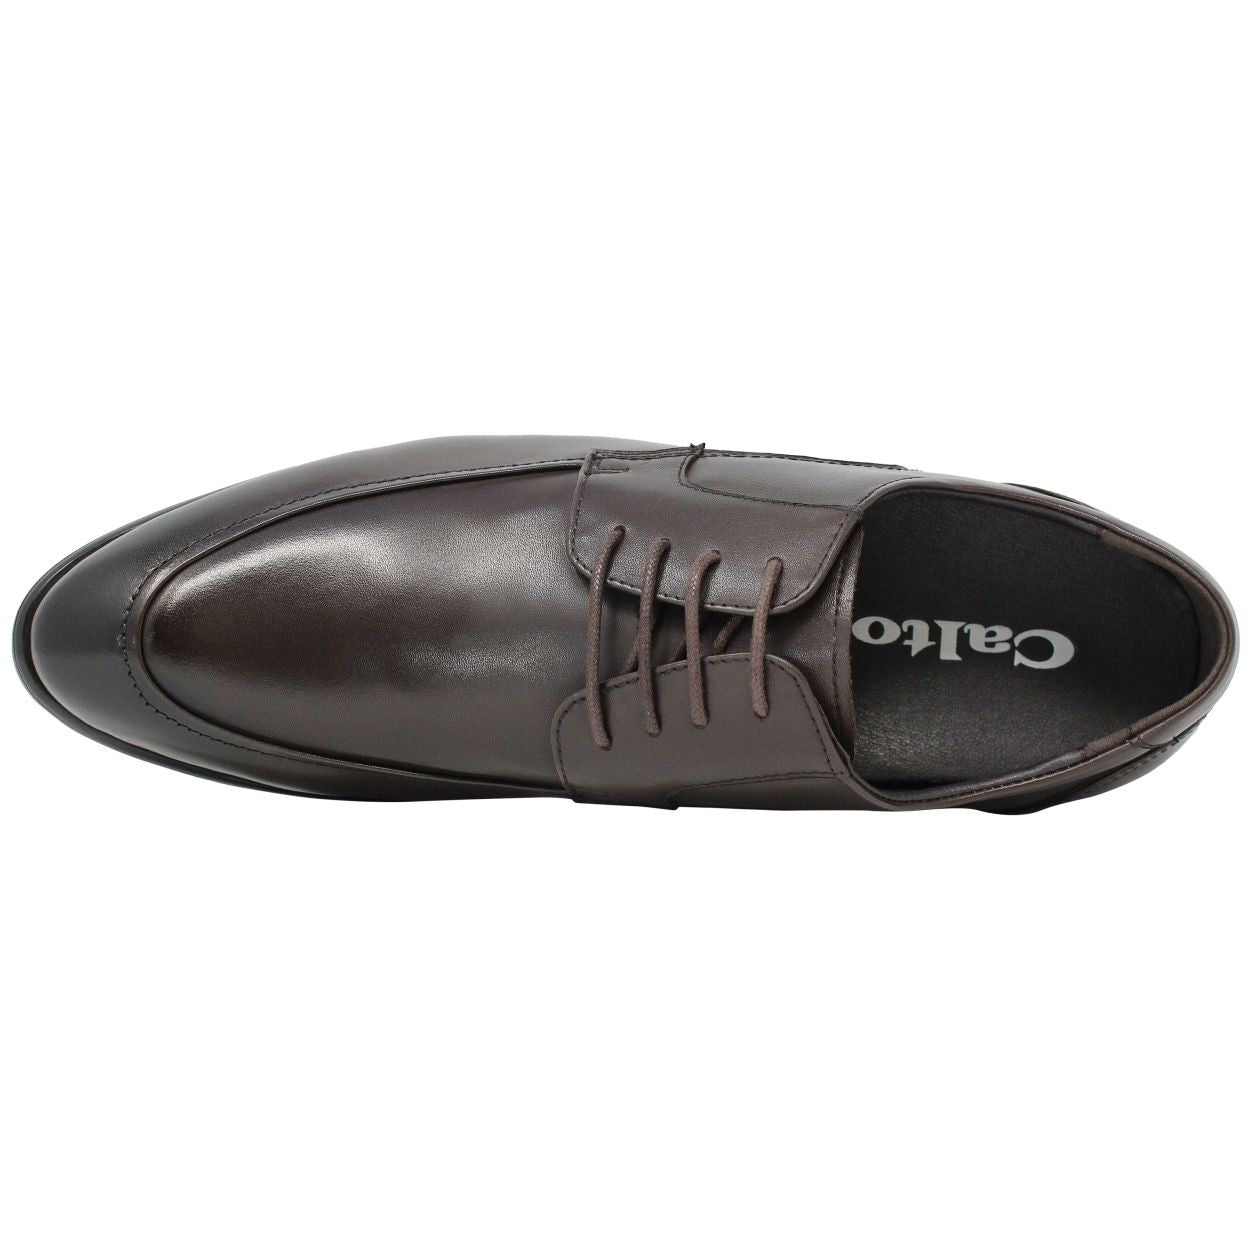 CALTO - Y10315 - 2.8 Inches Taller (Coffee Brown) - Size 9 Only